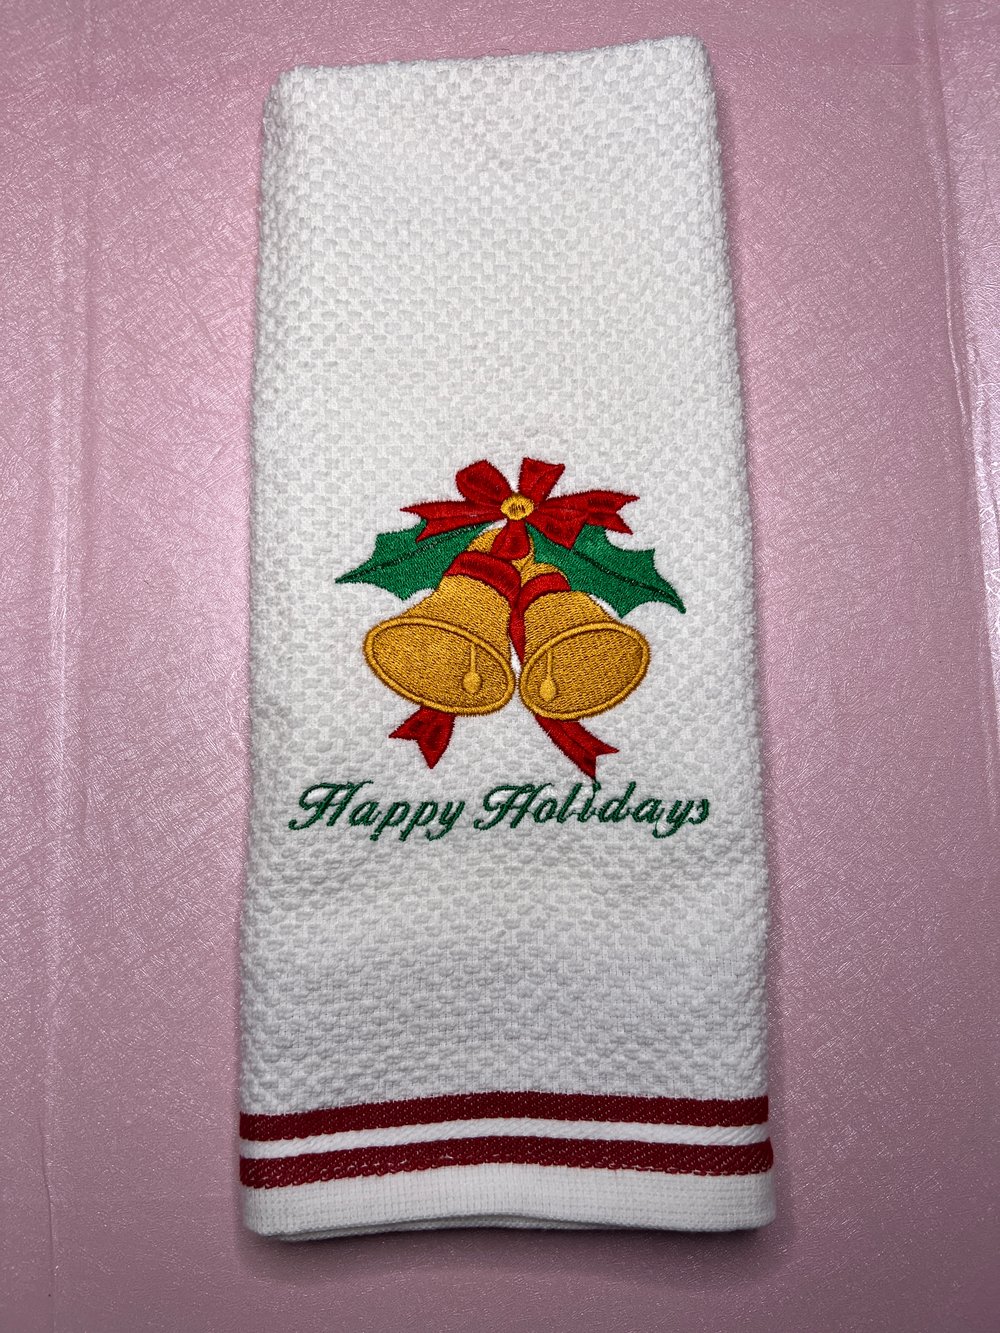 https://assets.bigcartel.com/product_images/461d2808-2a75-47b3-88db-150a3ce0ead7/set-of-2-embroidered-kitchen-holiday-towels.jpg?auto=format&fit=max&w=1000